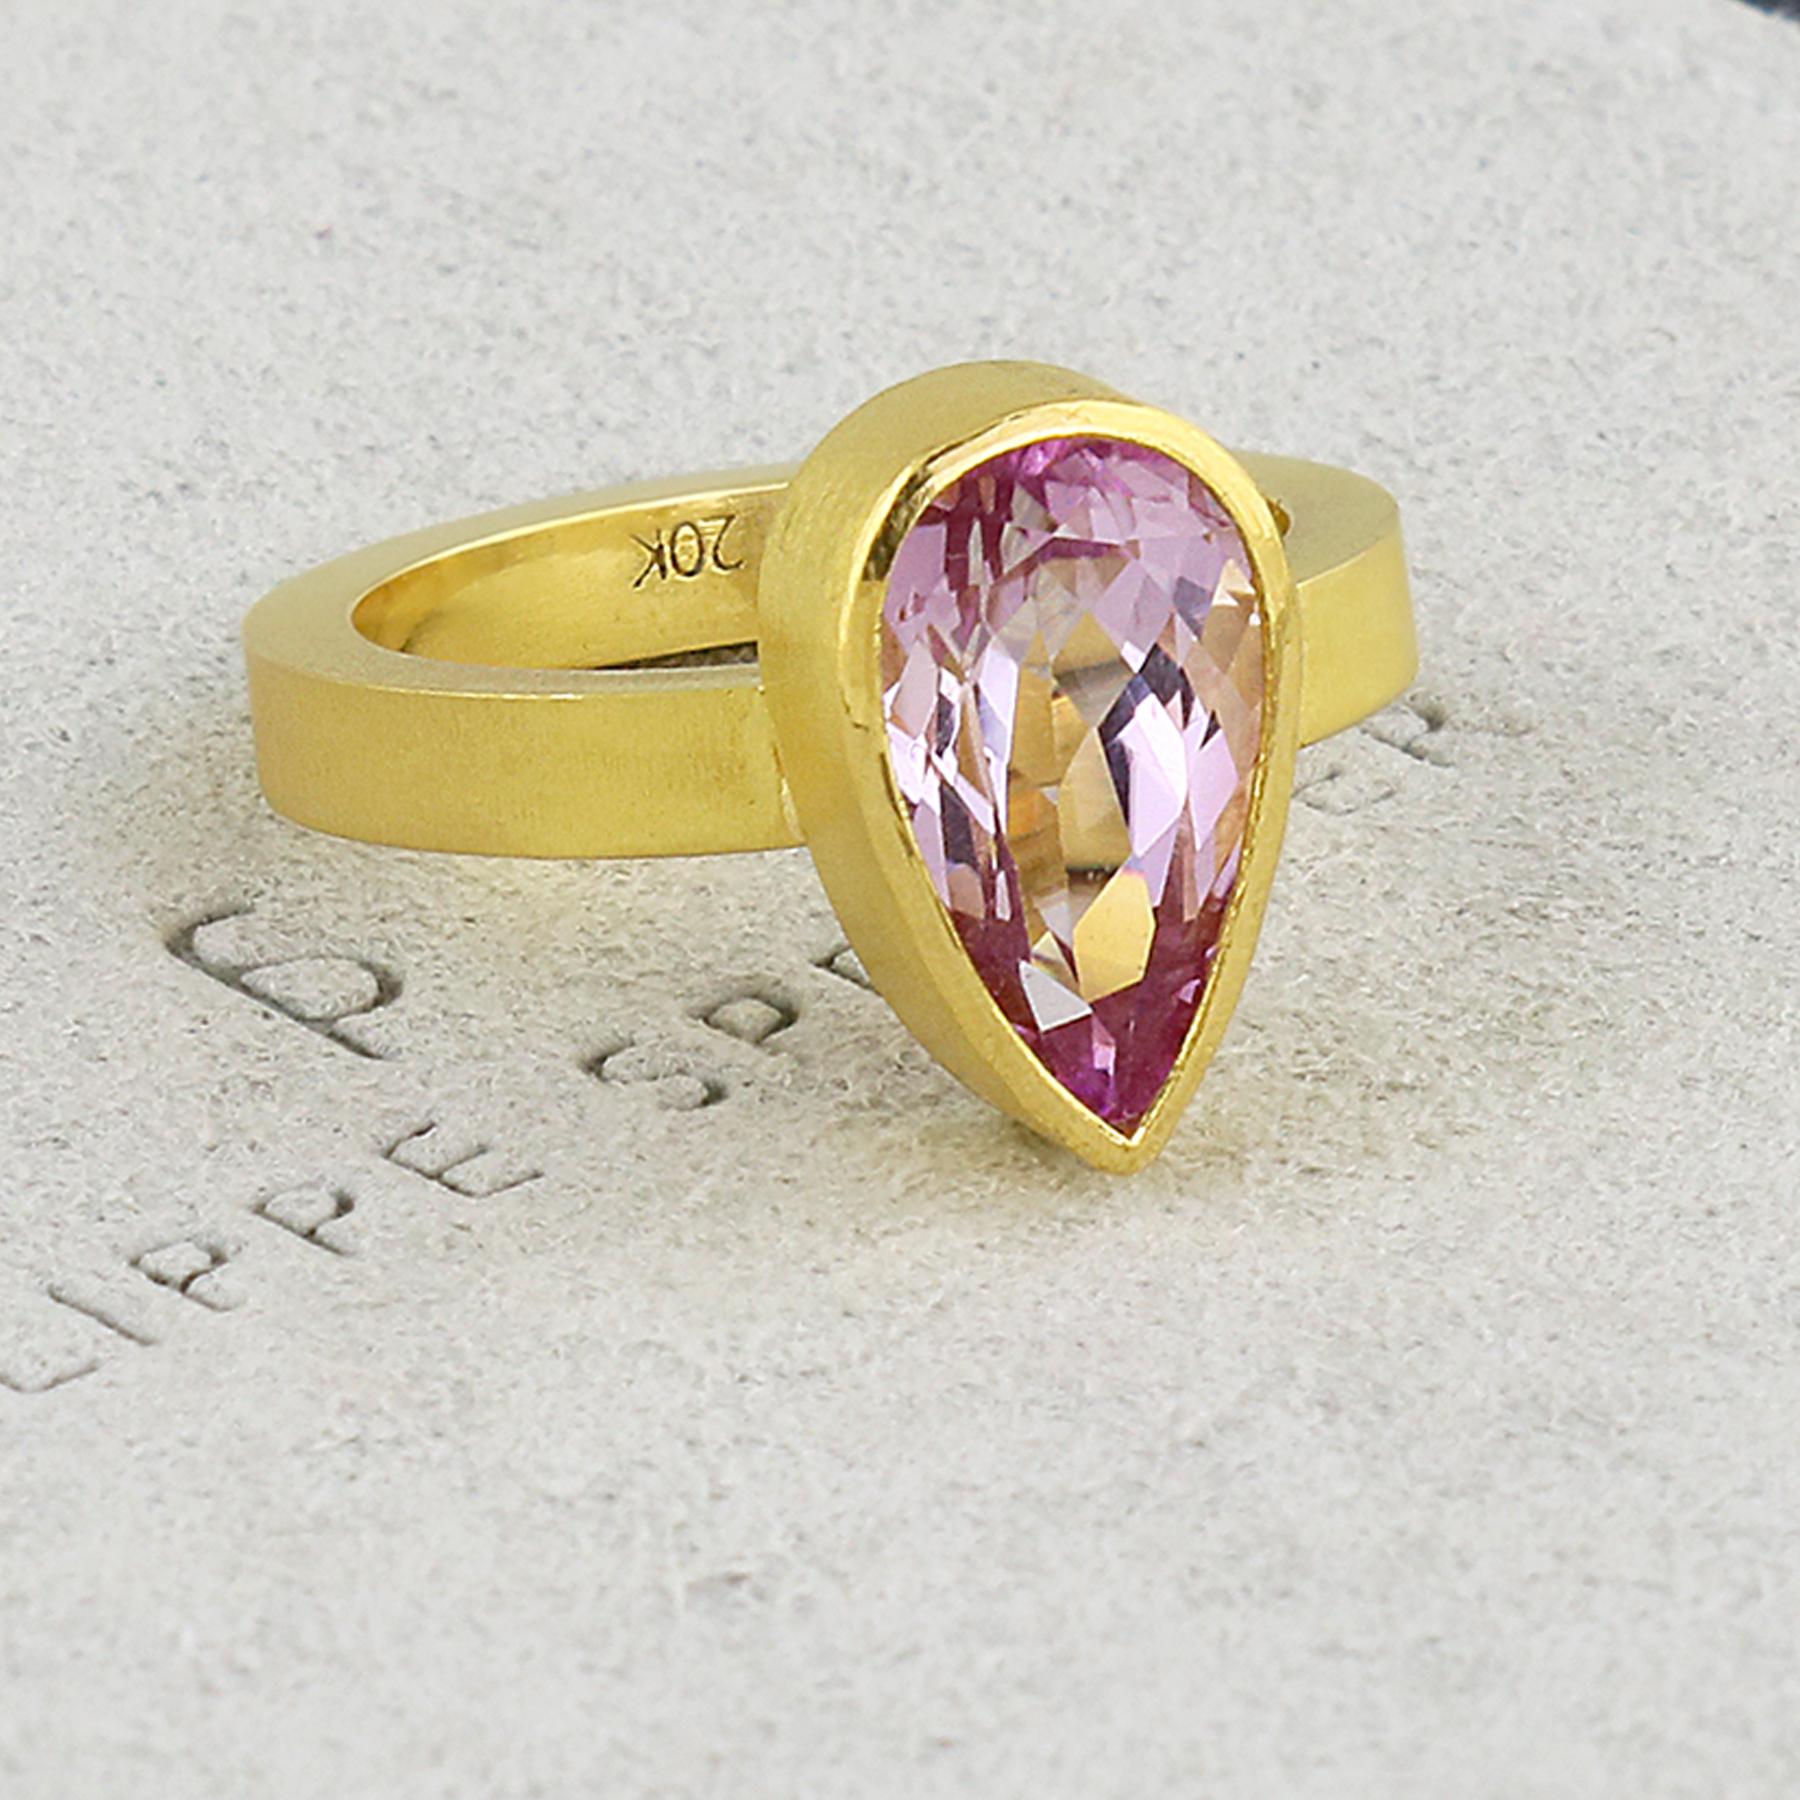 PHILIPPE SPENCER - Rare 3.85 Ct. Fine Brilliant Pink Brazilian Teardrop Morganite wrapped in backless 22K Gold setting with Solid 20K Gold Hand & Anvil-Forged Statement Ring. Heavy Brushed Exterior with Polished Interior Finish. Size 6 1/4, and is